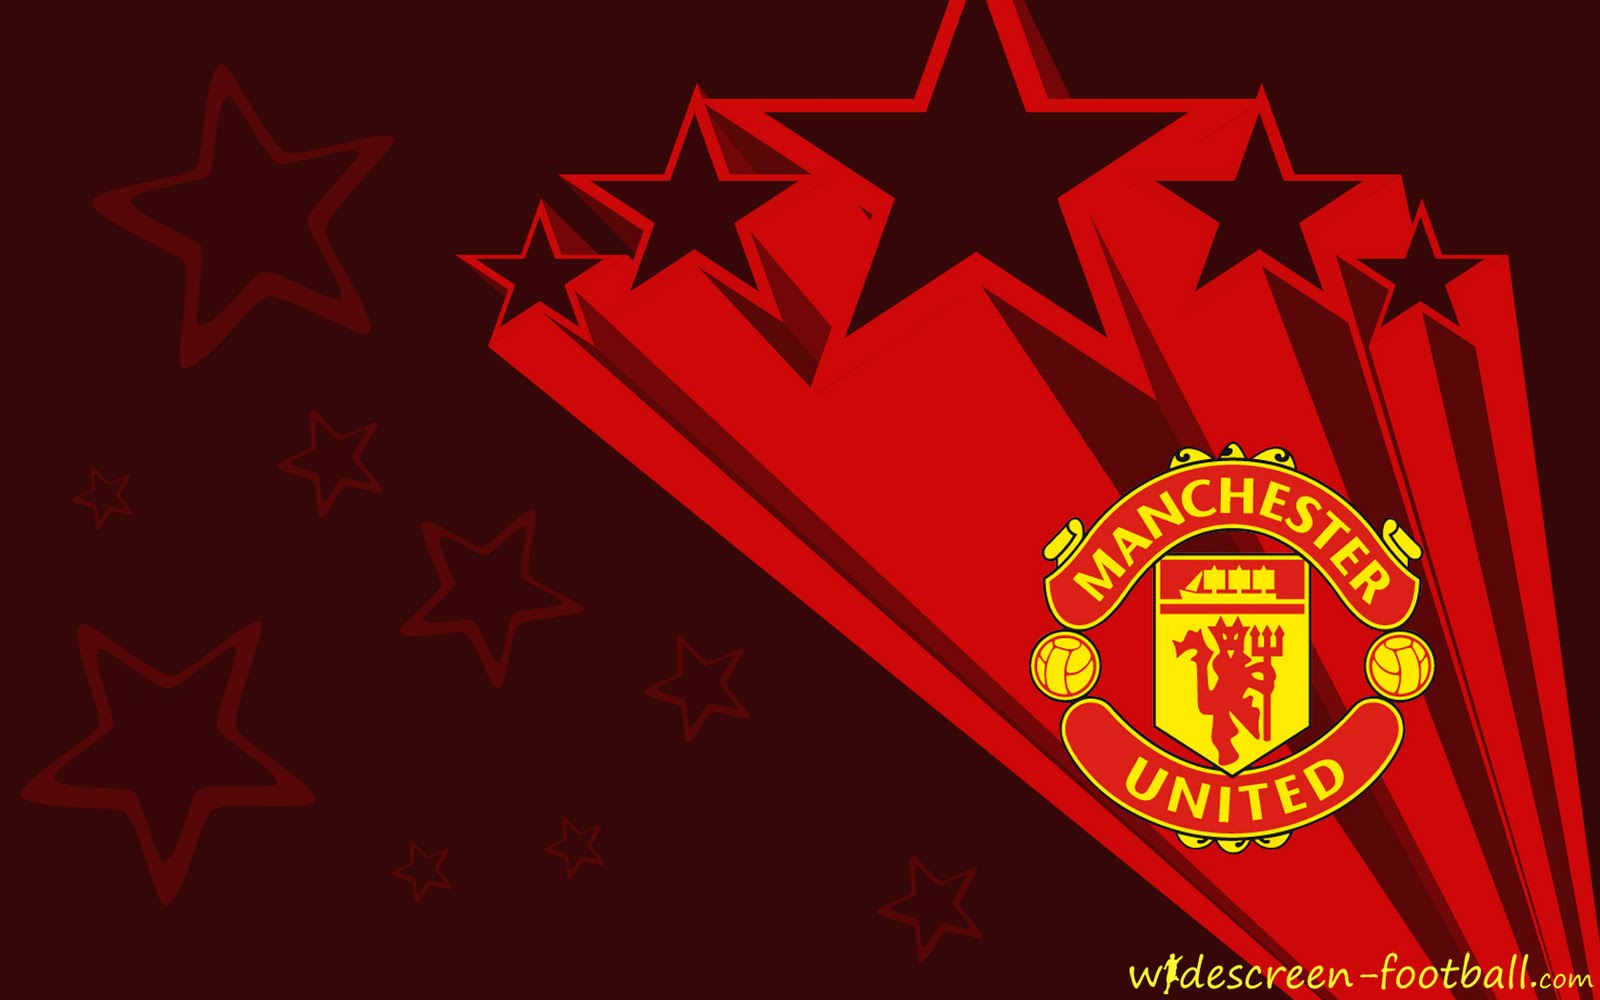  Manchester  United  Wallpapers  HD  HD  Wallpapers  